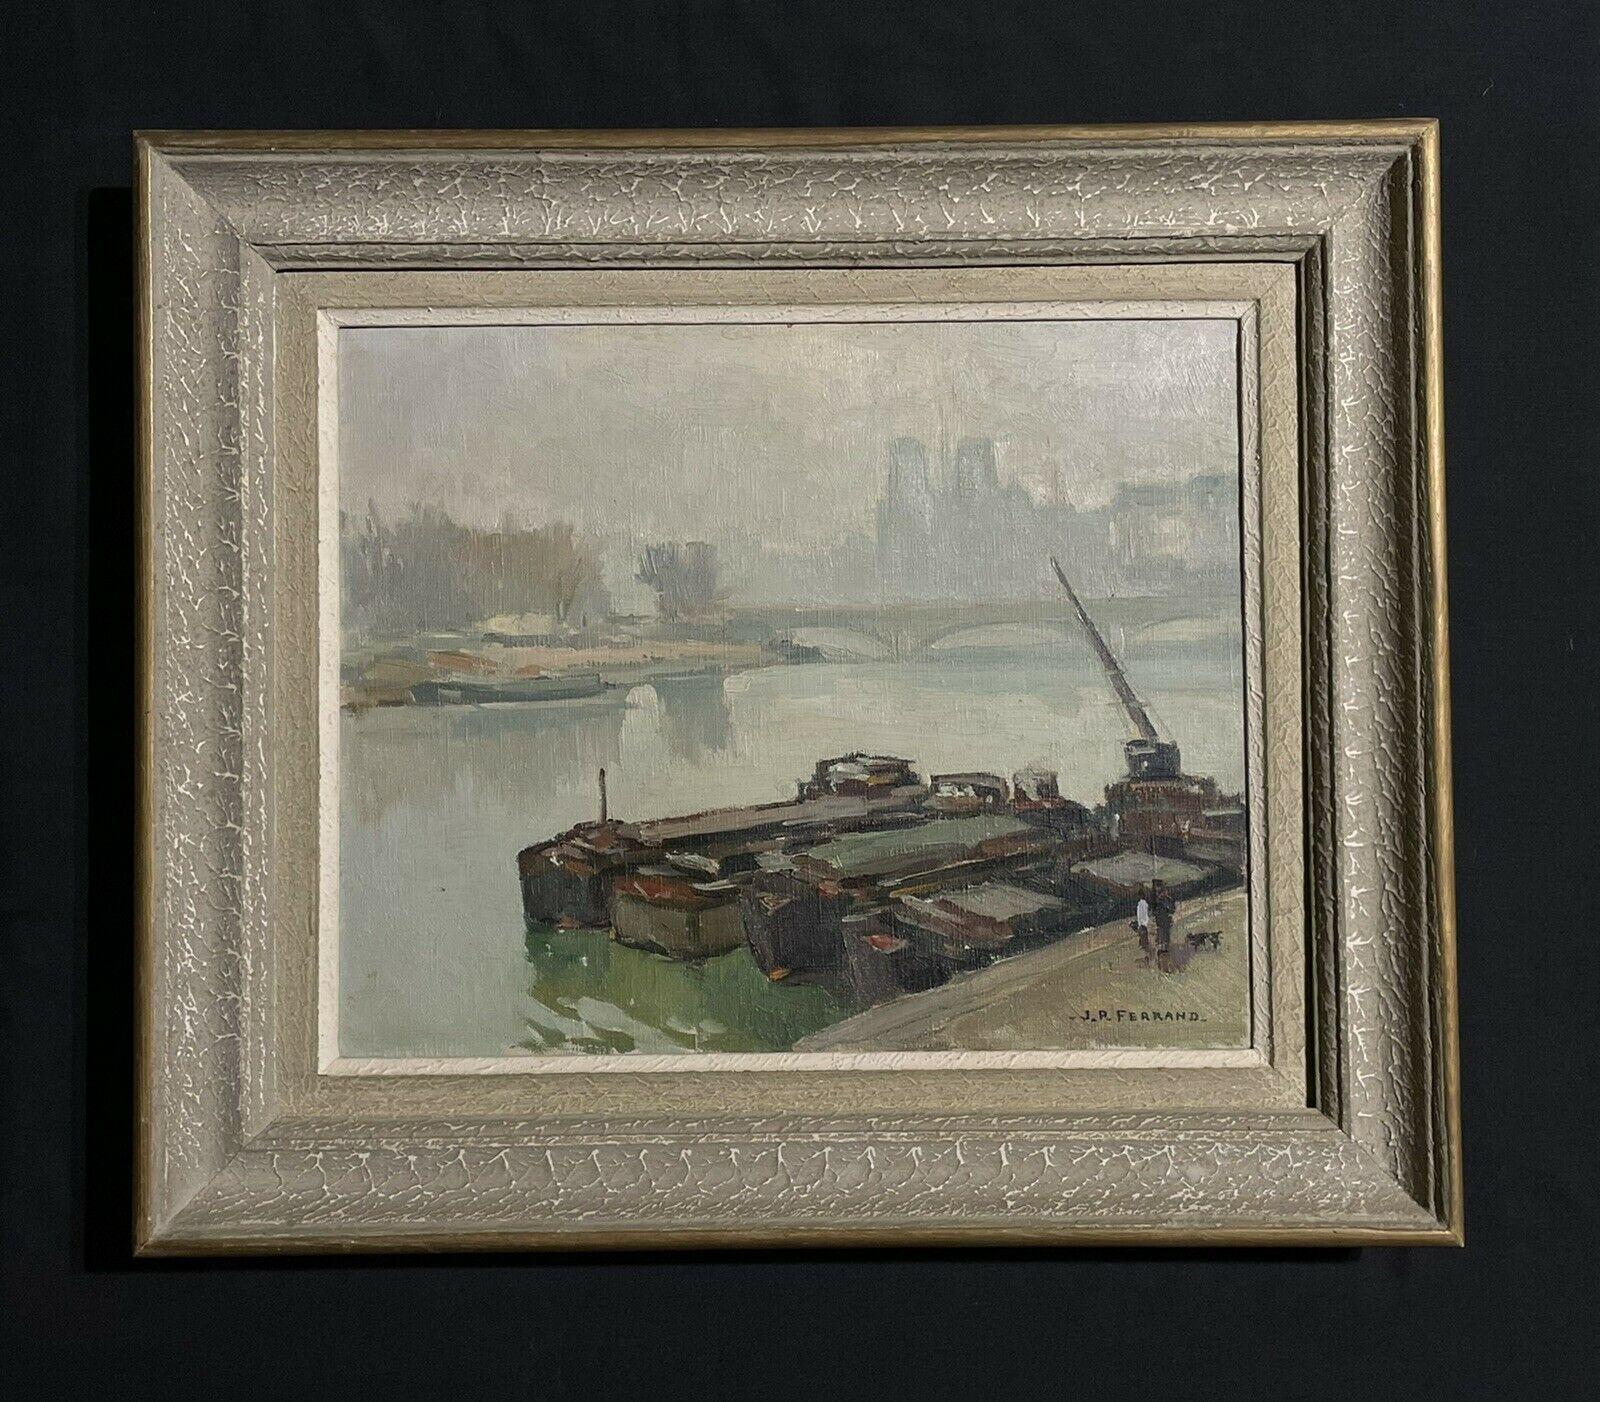 Artist/ School: Jean-Pierre Ferrand (French, 1902 - 1983) signed

Title: The River Seine, Paris. Beautiful misty view over the skyline of Paris, looking towards the Notre Dame cathedral. 

Medium:  signed, oil painting on canvas, framed.

Size:

   